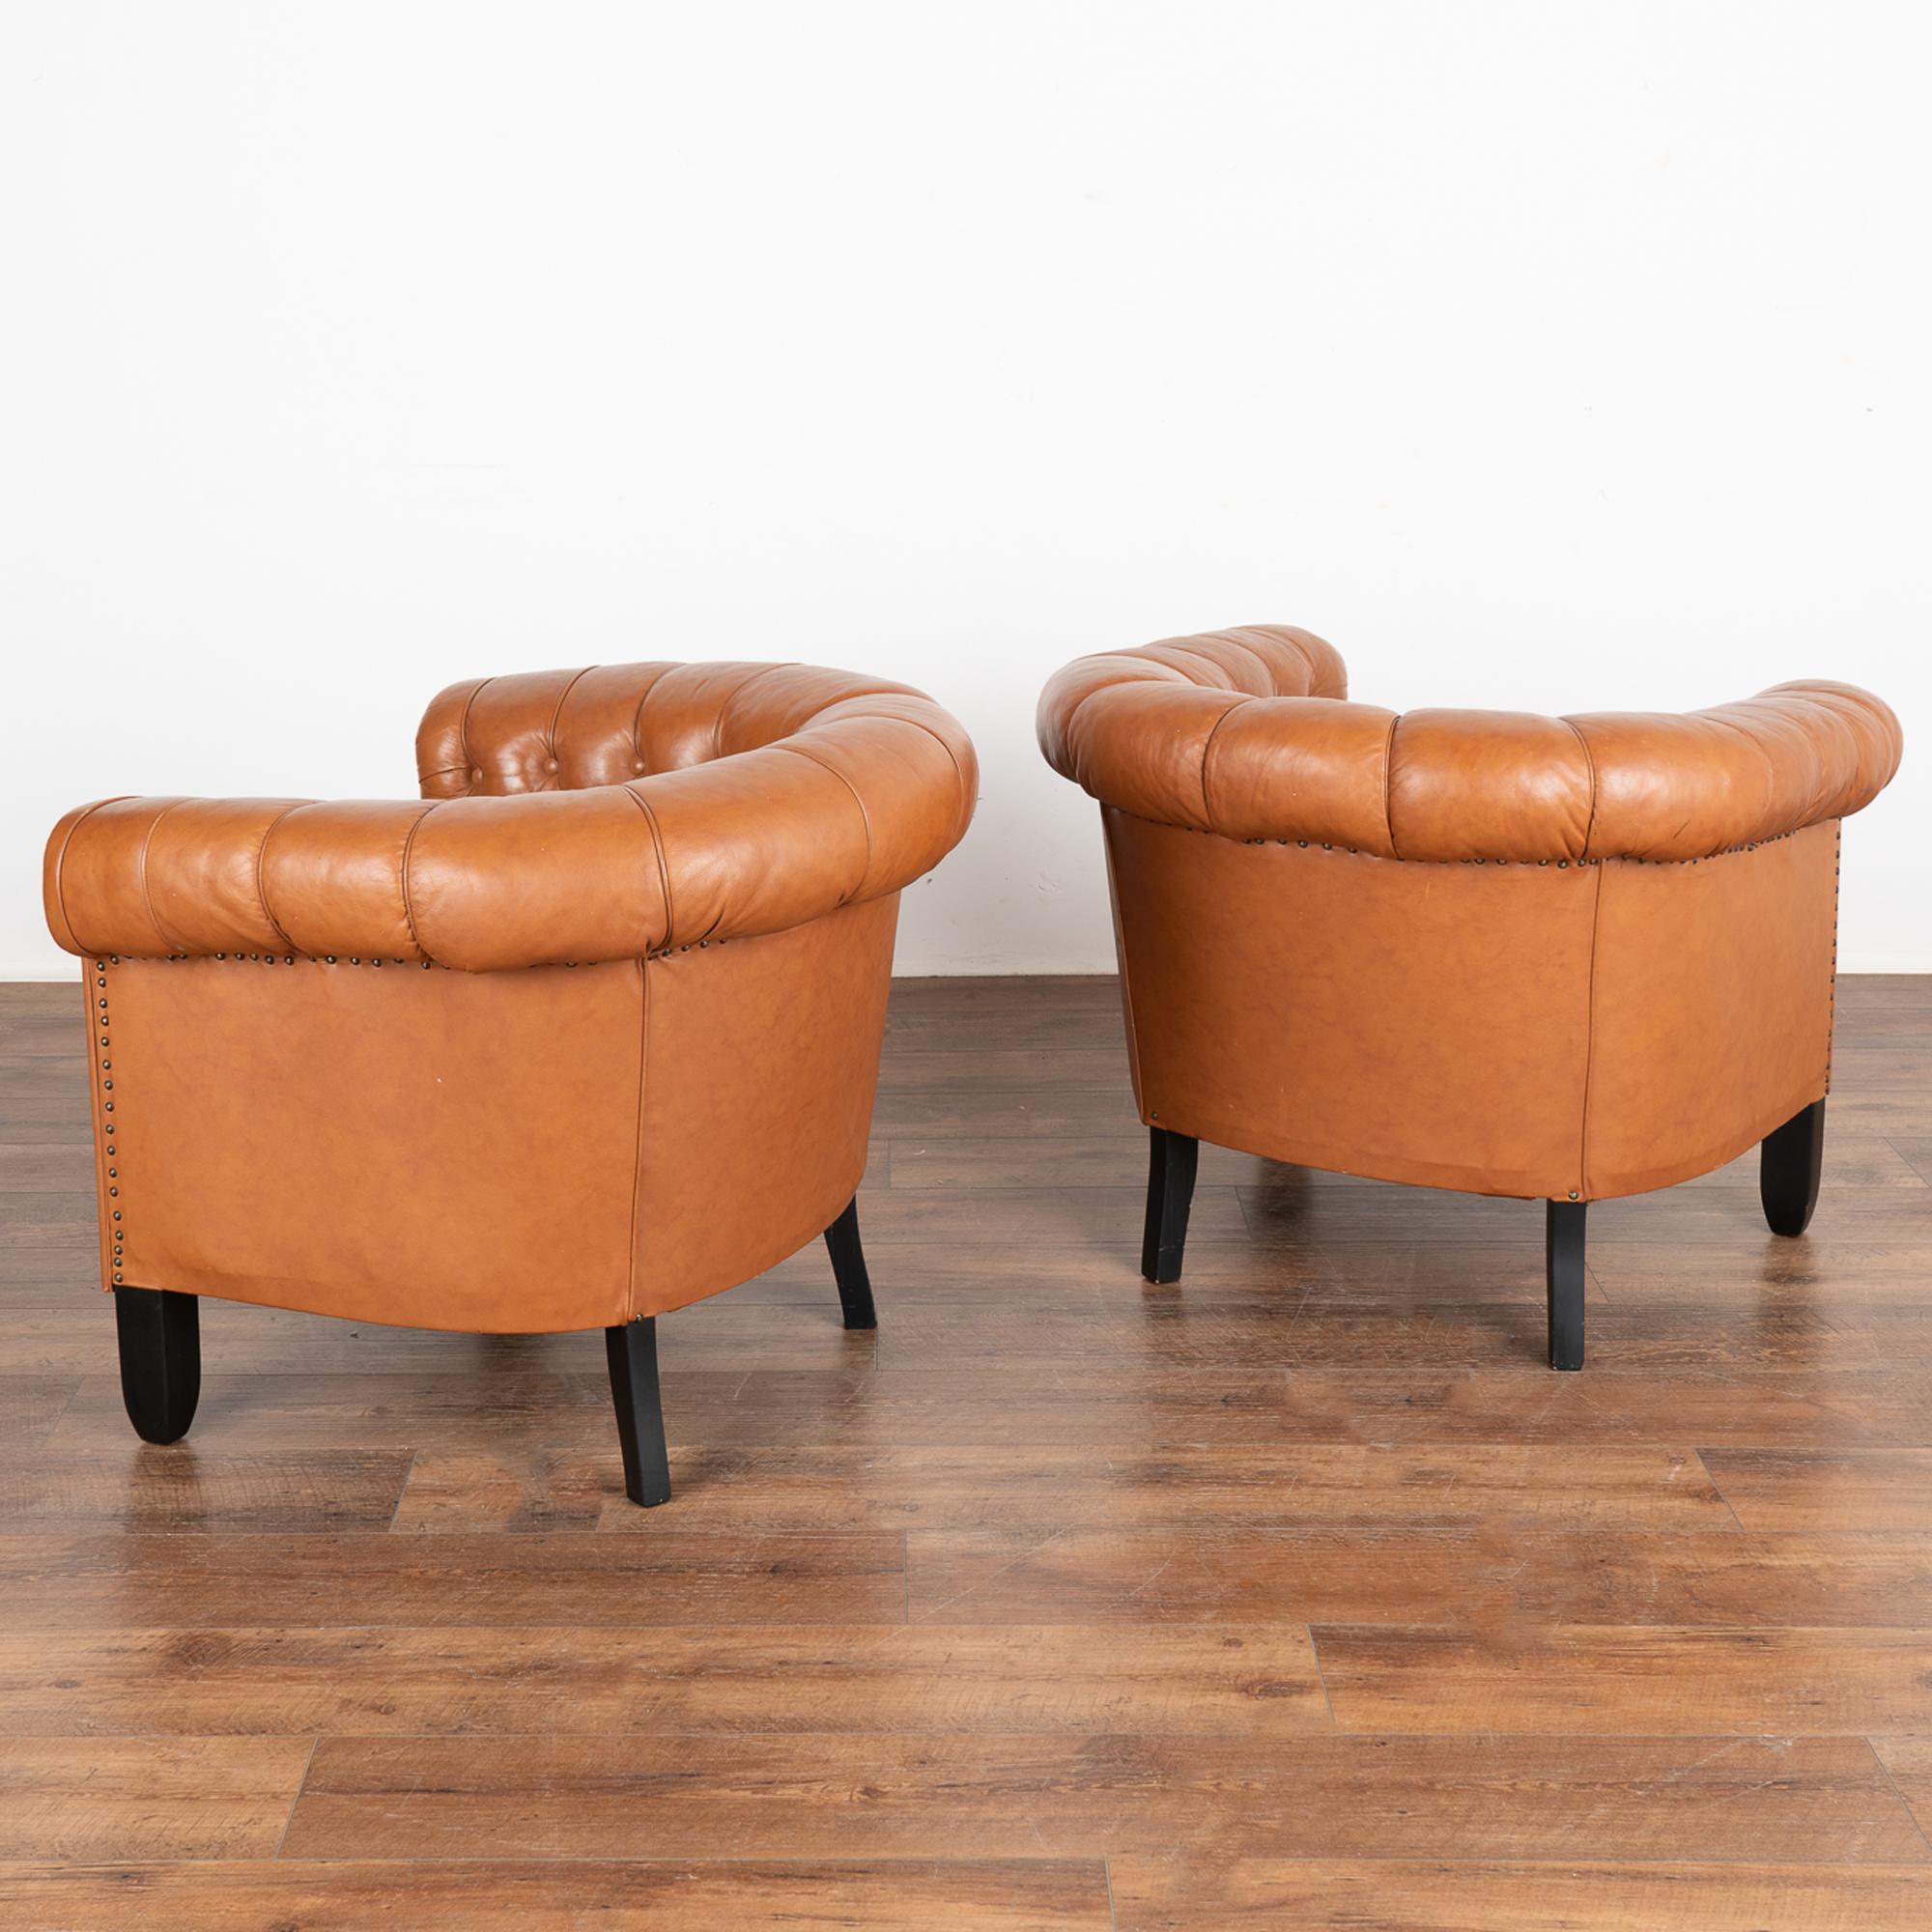 Pair, Vintage Brown Leather Barrel Back Arm Chairs, Denmark circa 1940 For Sale 6